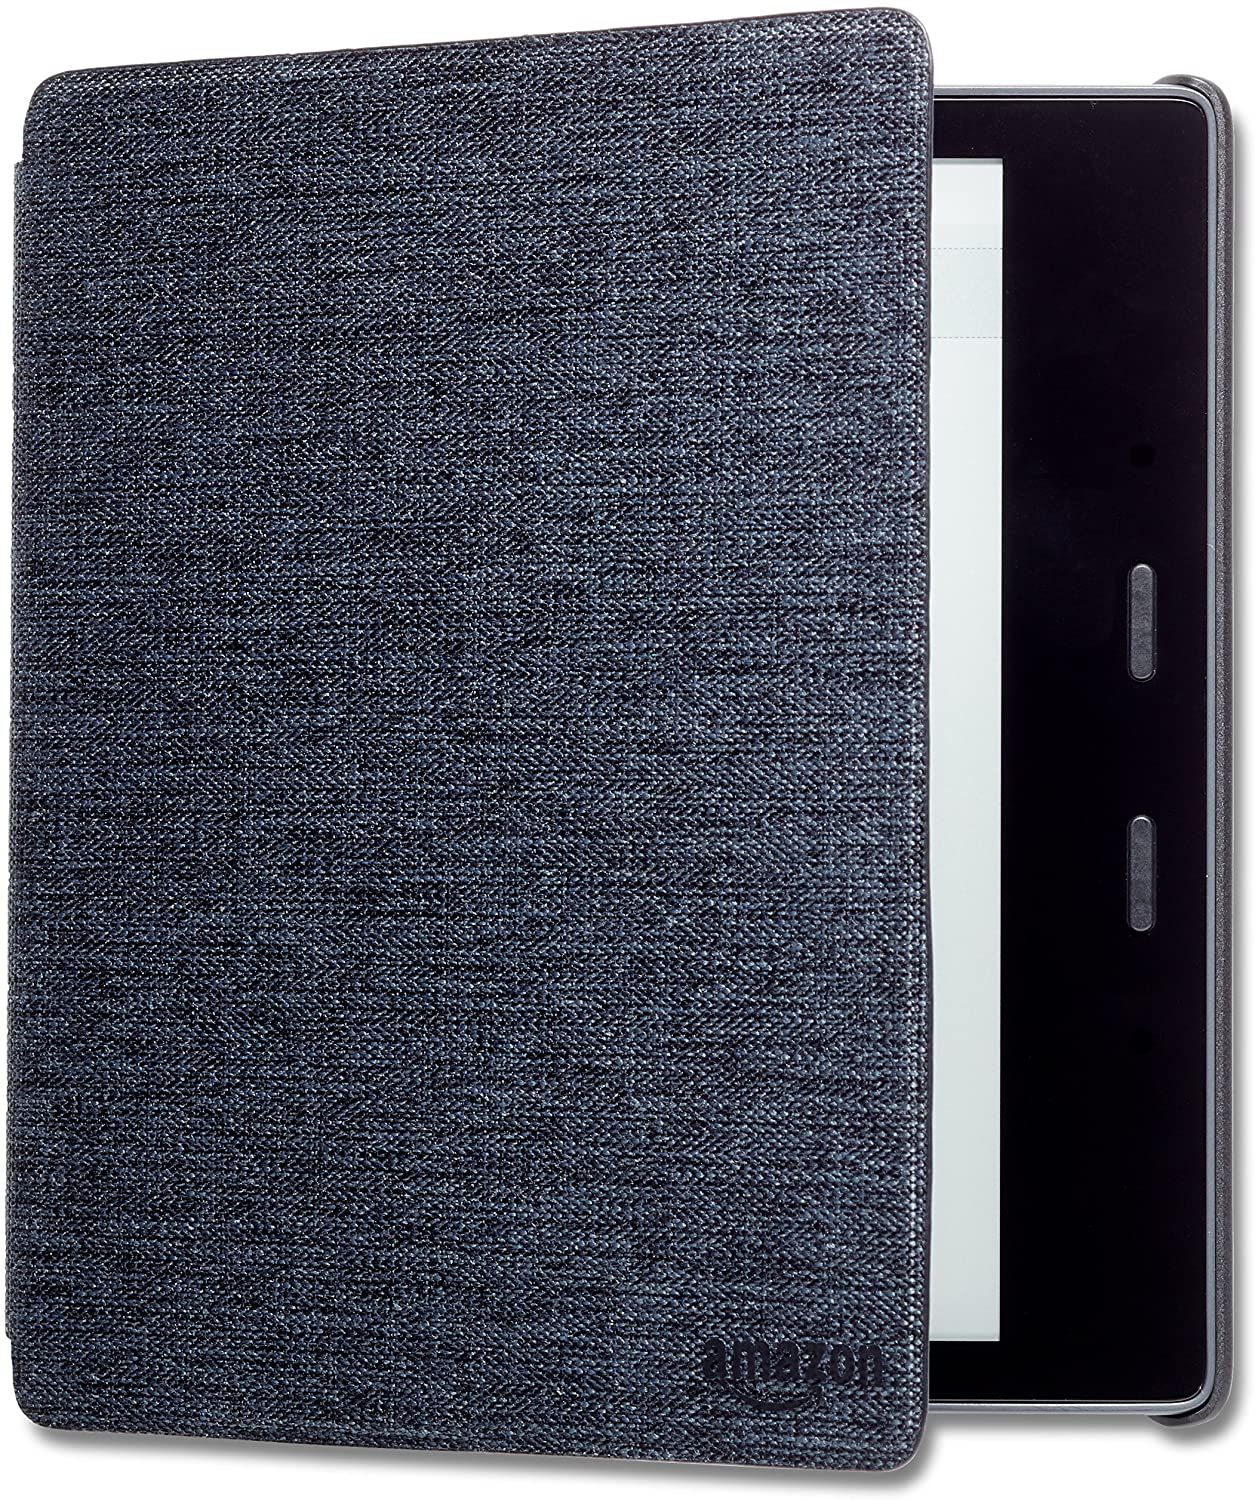 2. Amazon Kindle Oasis Water-Safe Fabric Cover